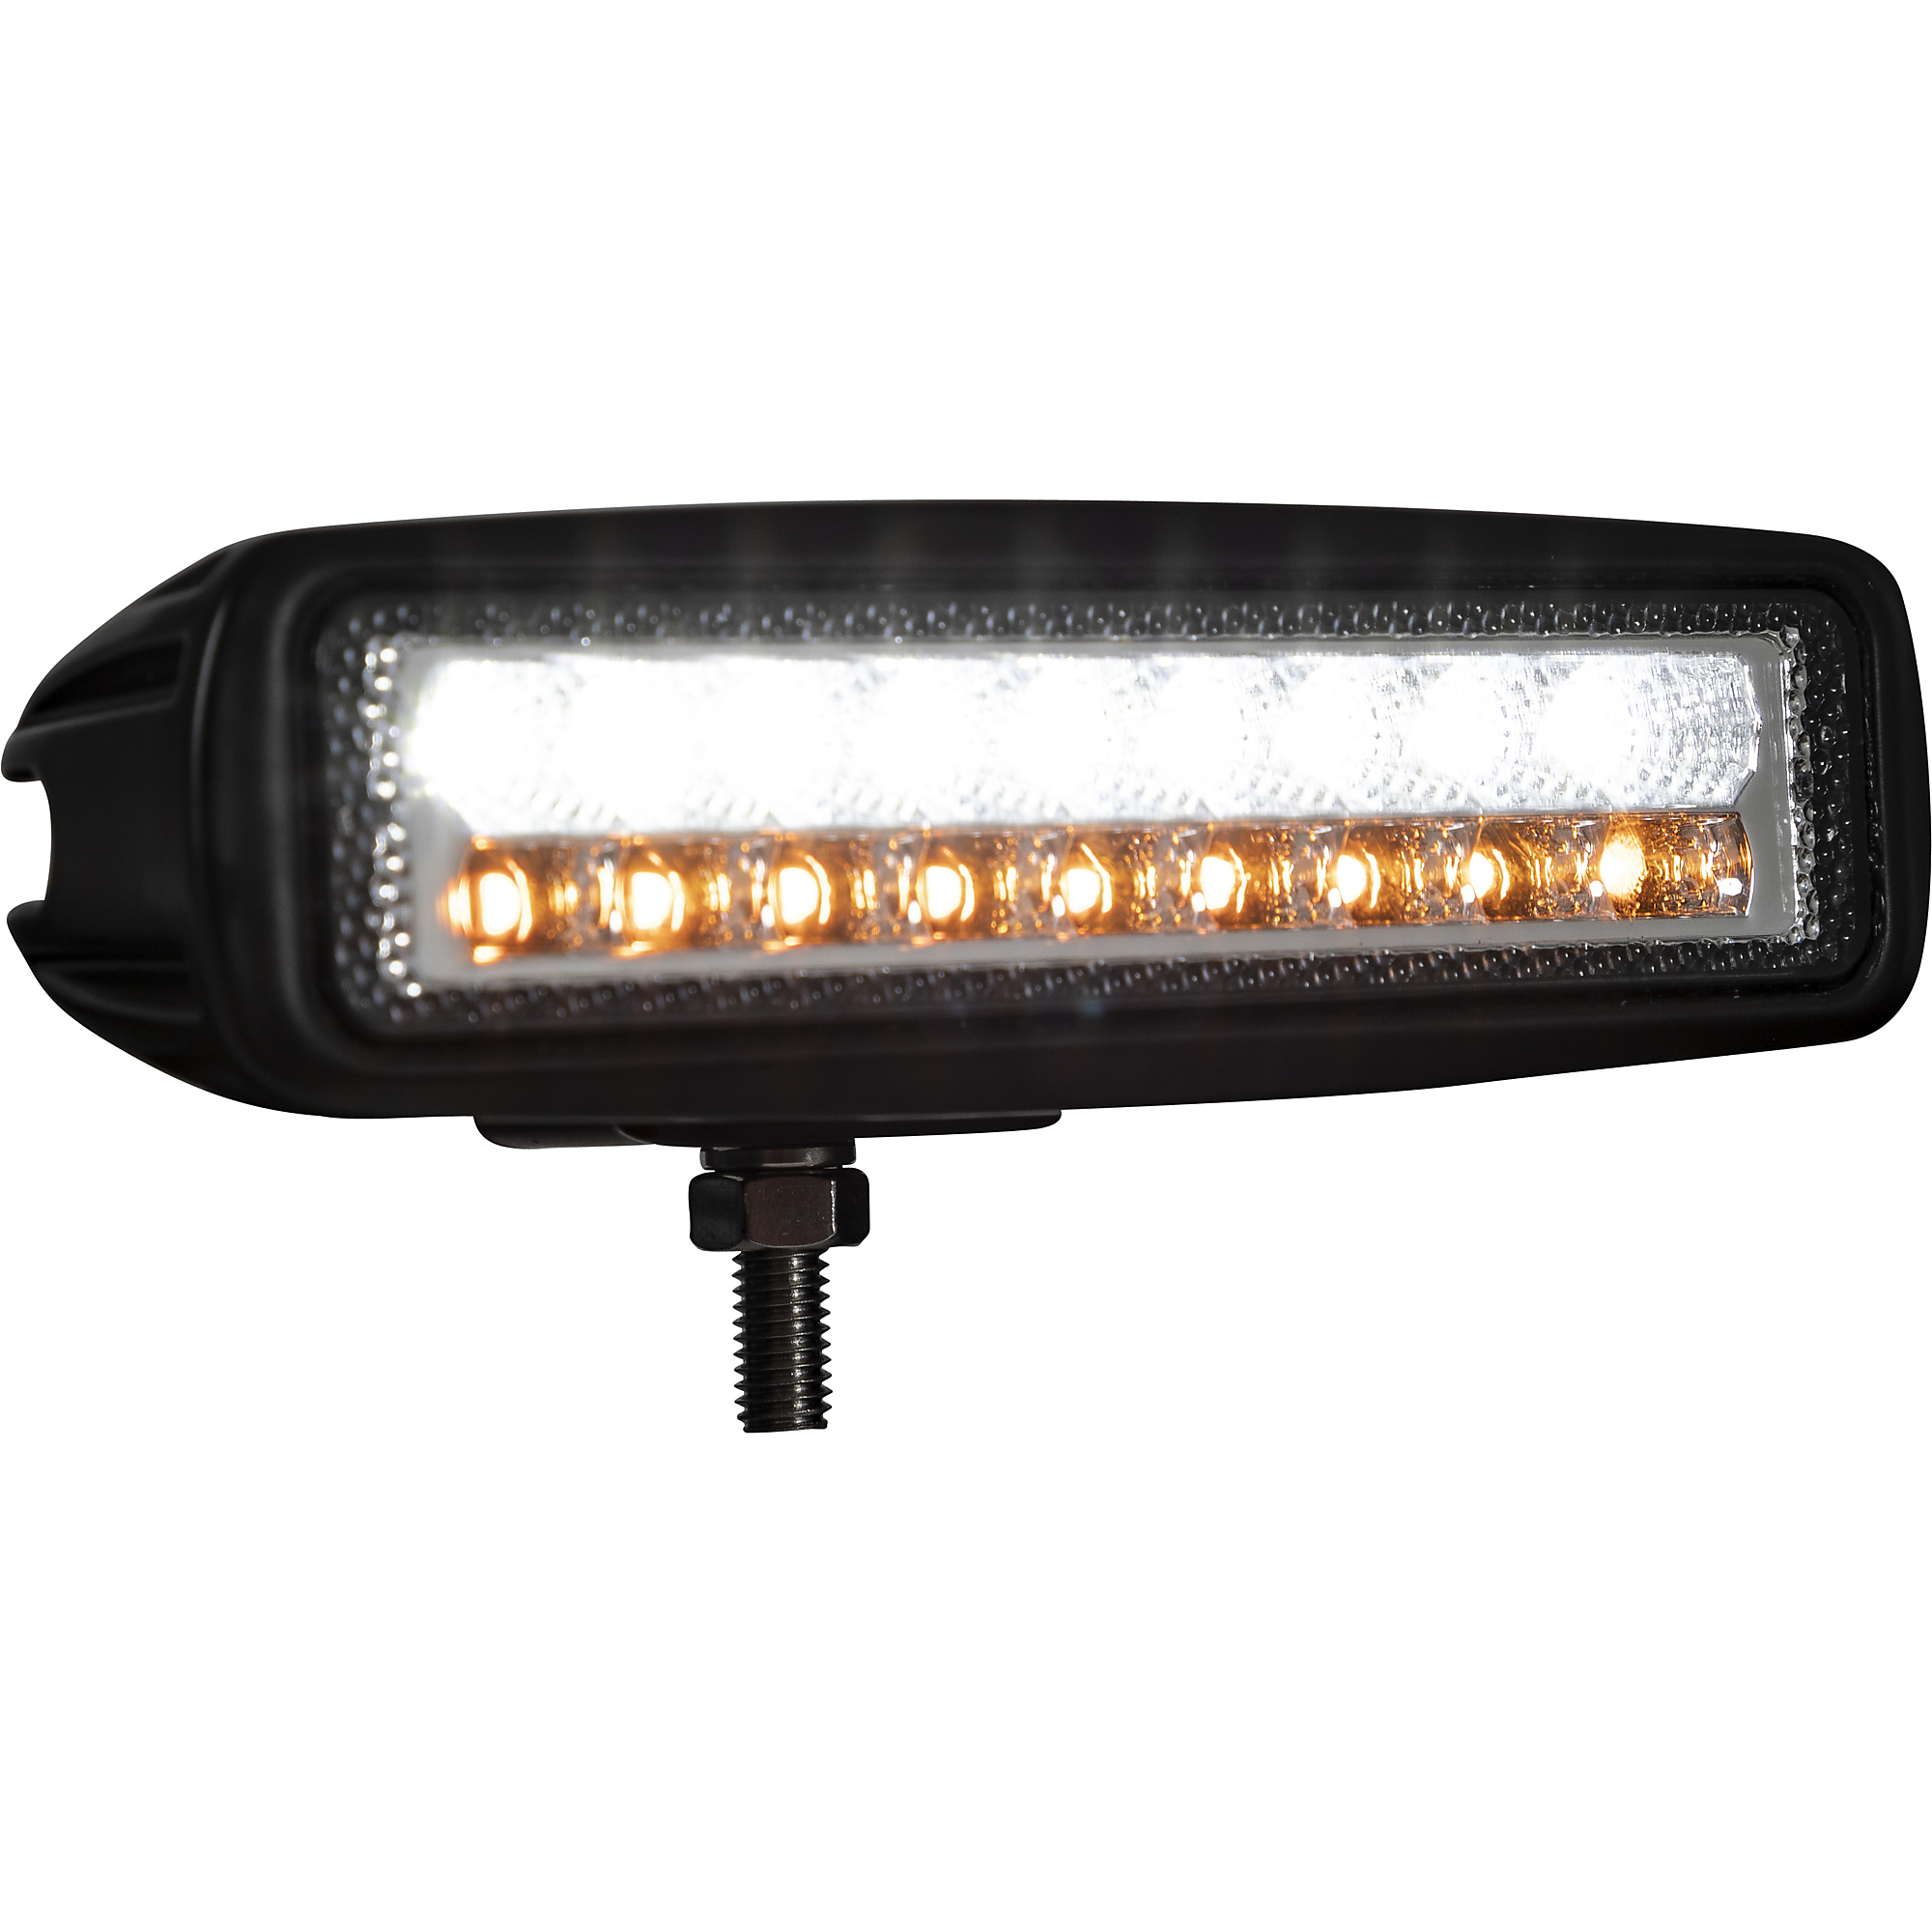 Buyers Products, 6.5Inch LED Flood Light with Strobe, Light Bulb Type LED, Model 1492233